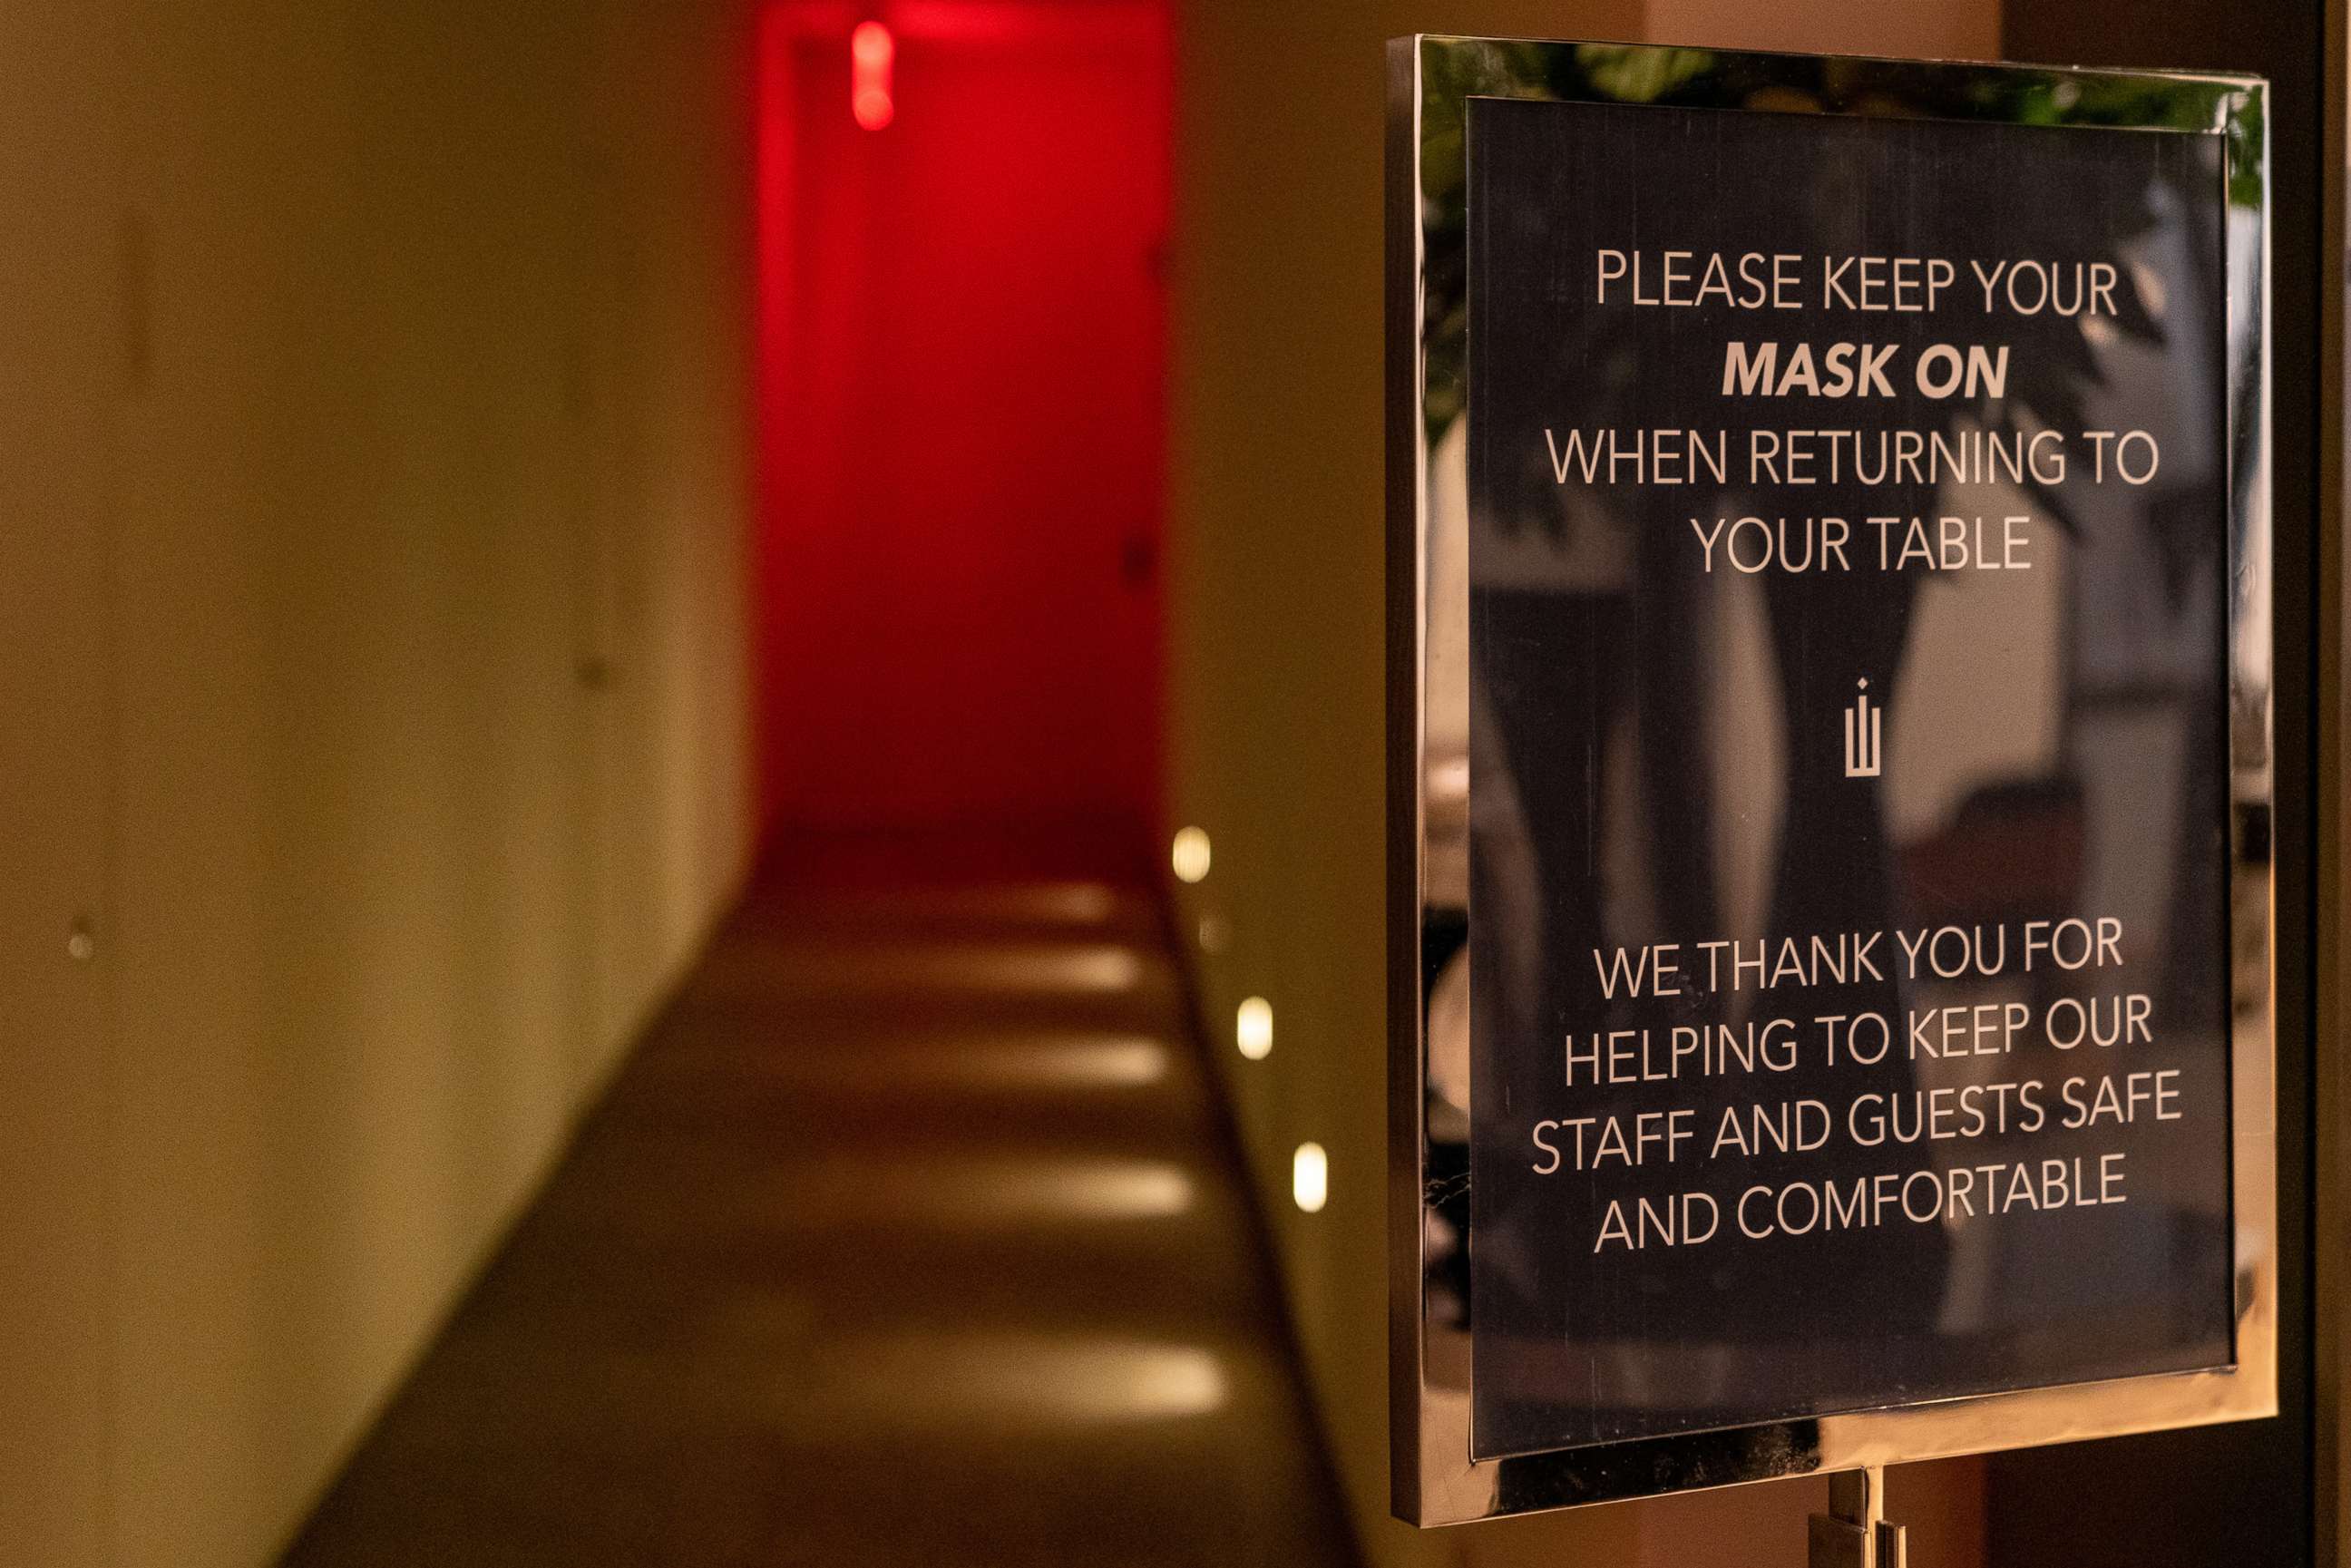 PHOTO: A sign asks customers to keep a mask on while returning to tables at Crown Shy restaurant in New York City, on Sept. 26, 2020. New York City will allow indoor dining rooms at 25% capacity beginning Sept. 30.